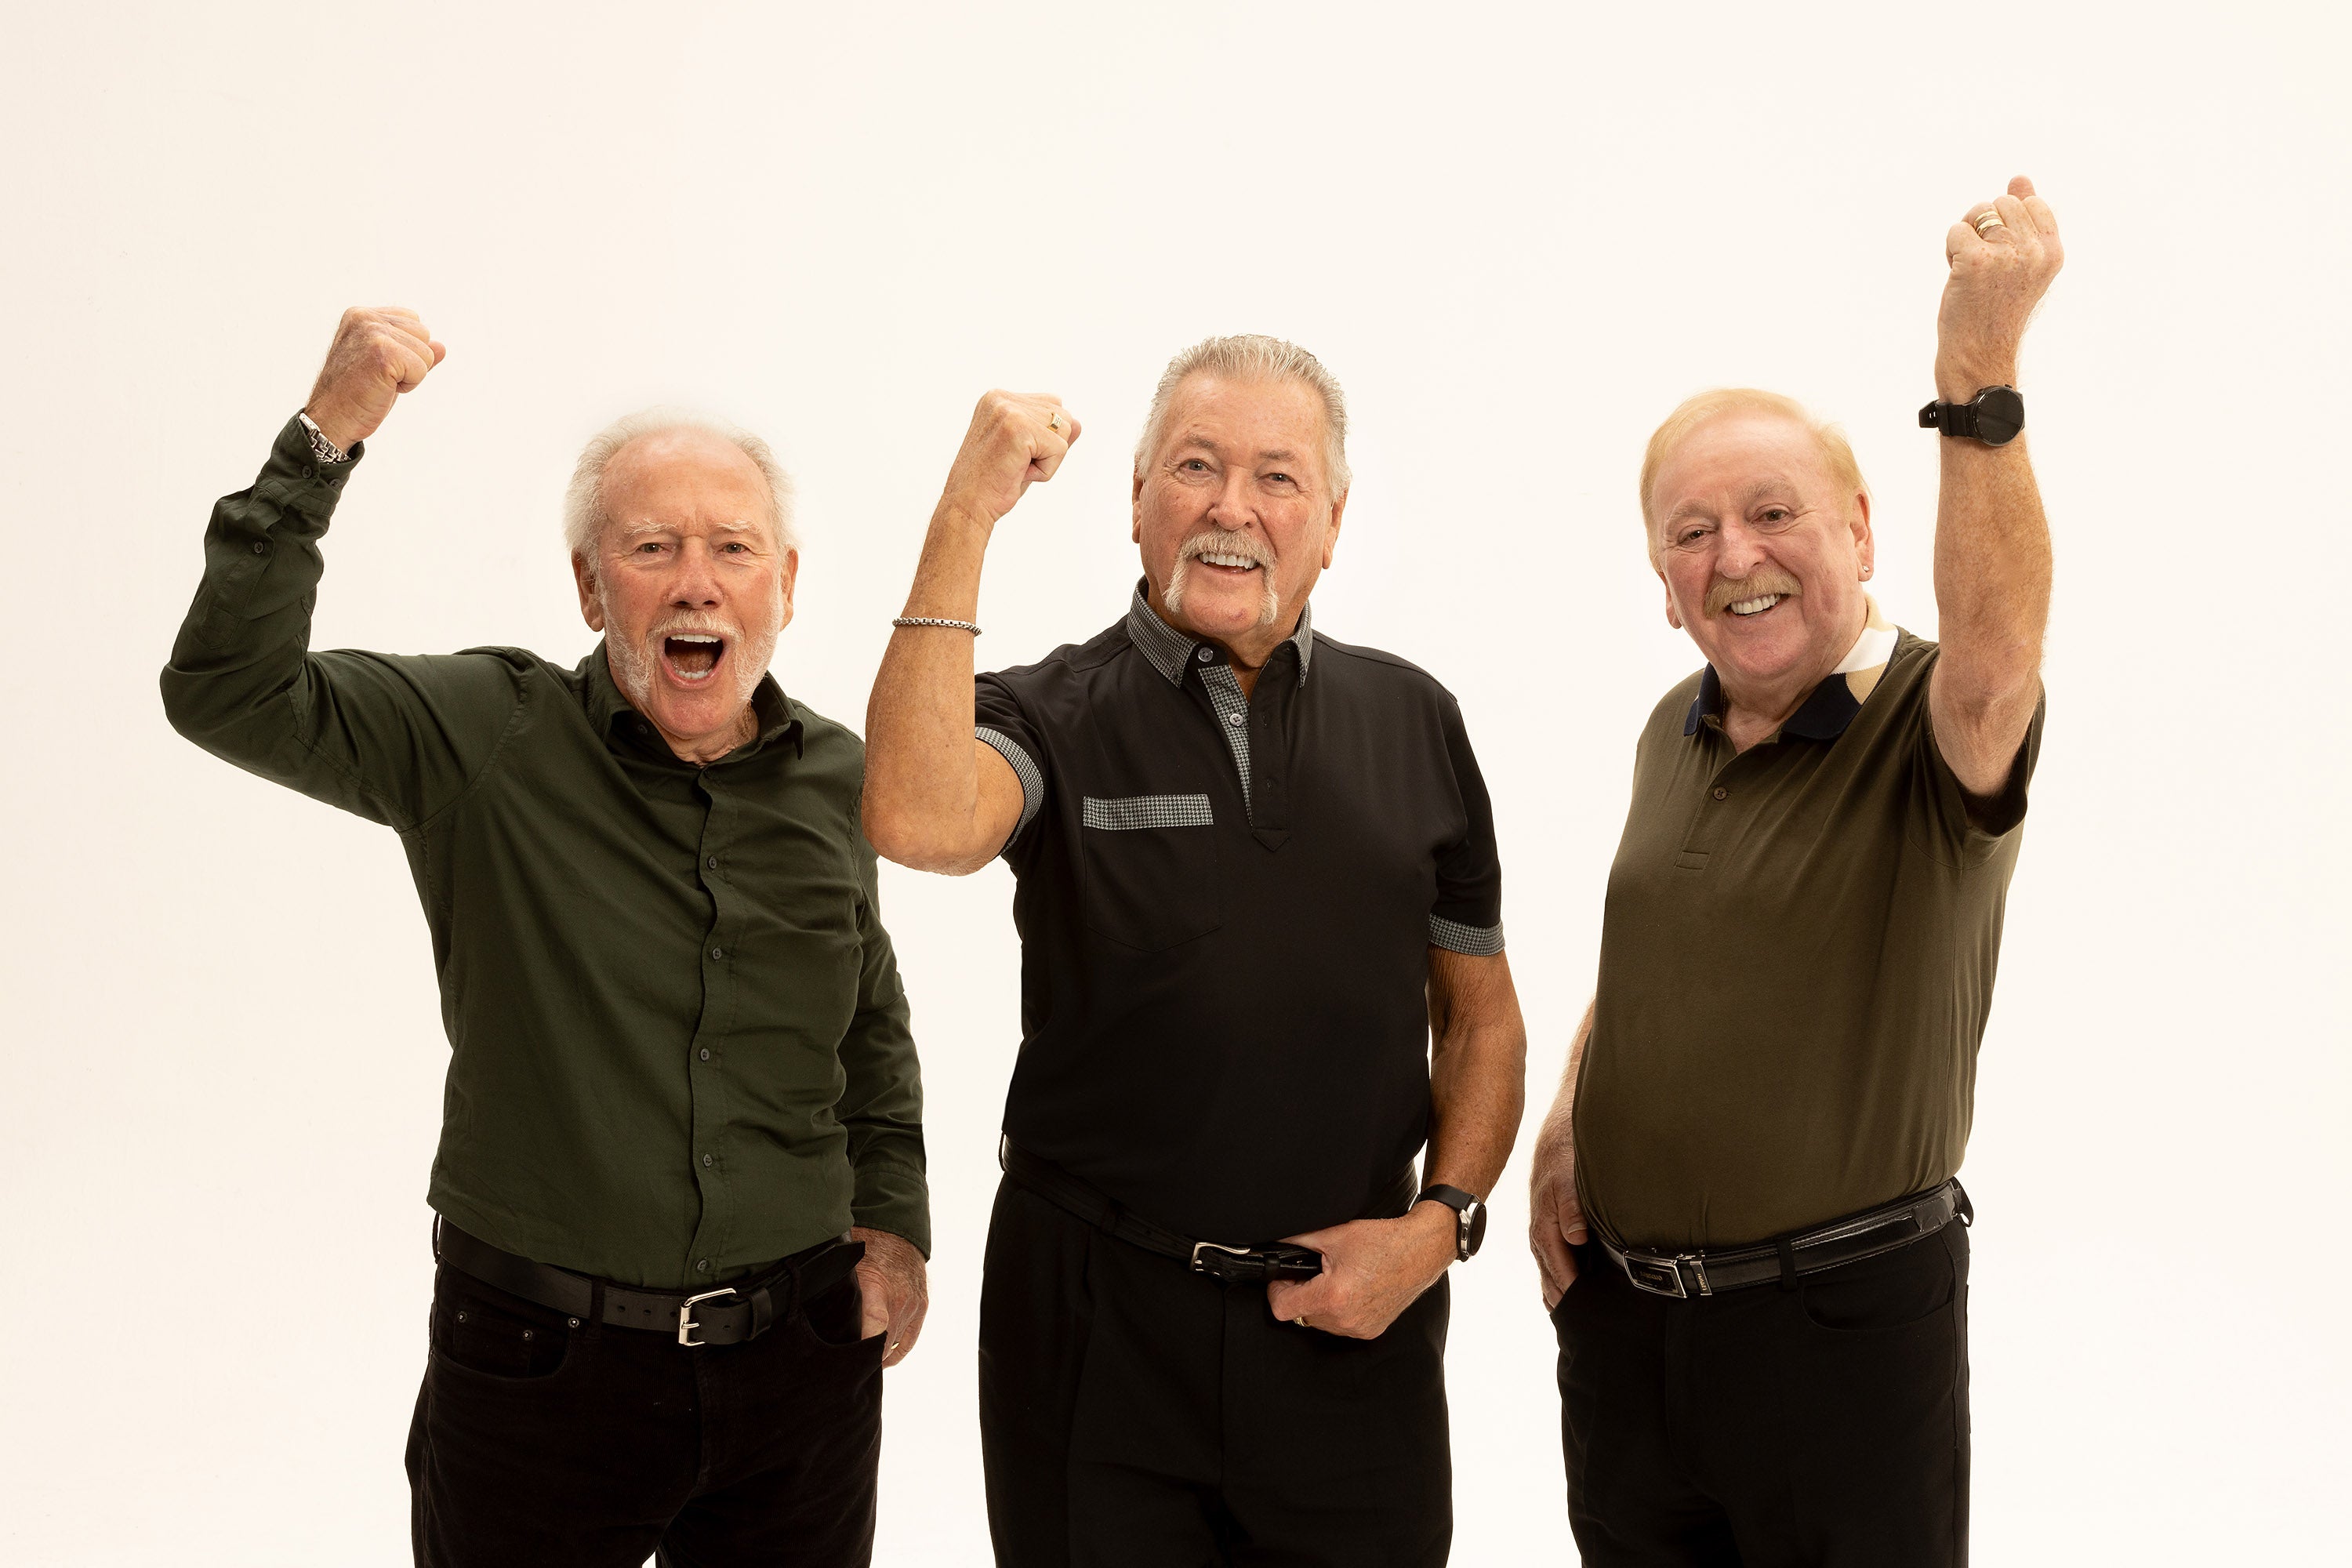 working presale c0de for The last ever London performance by THE WOLFE TONES tickets in London at Finsbury Park